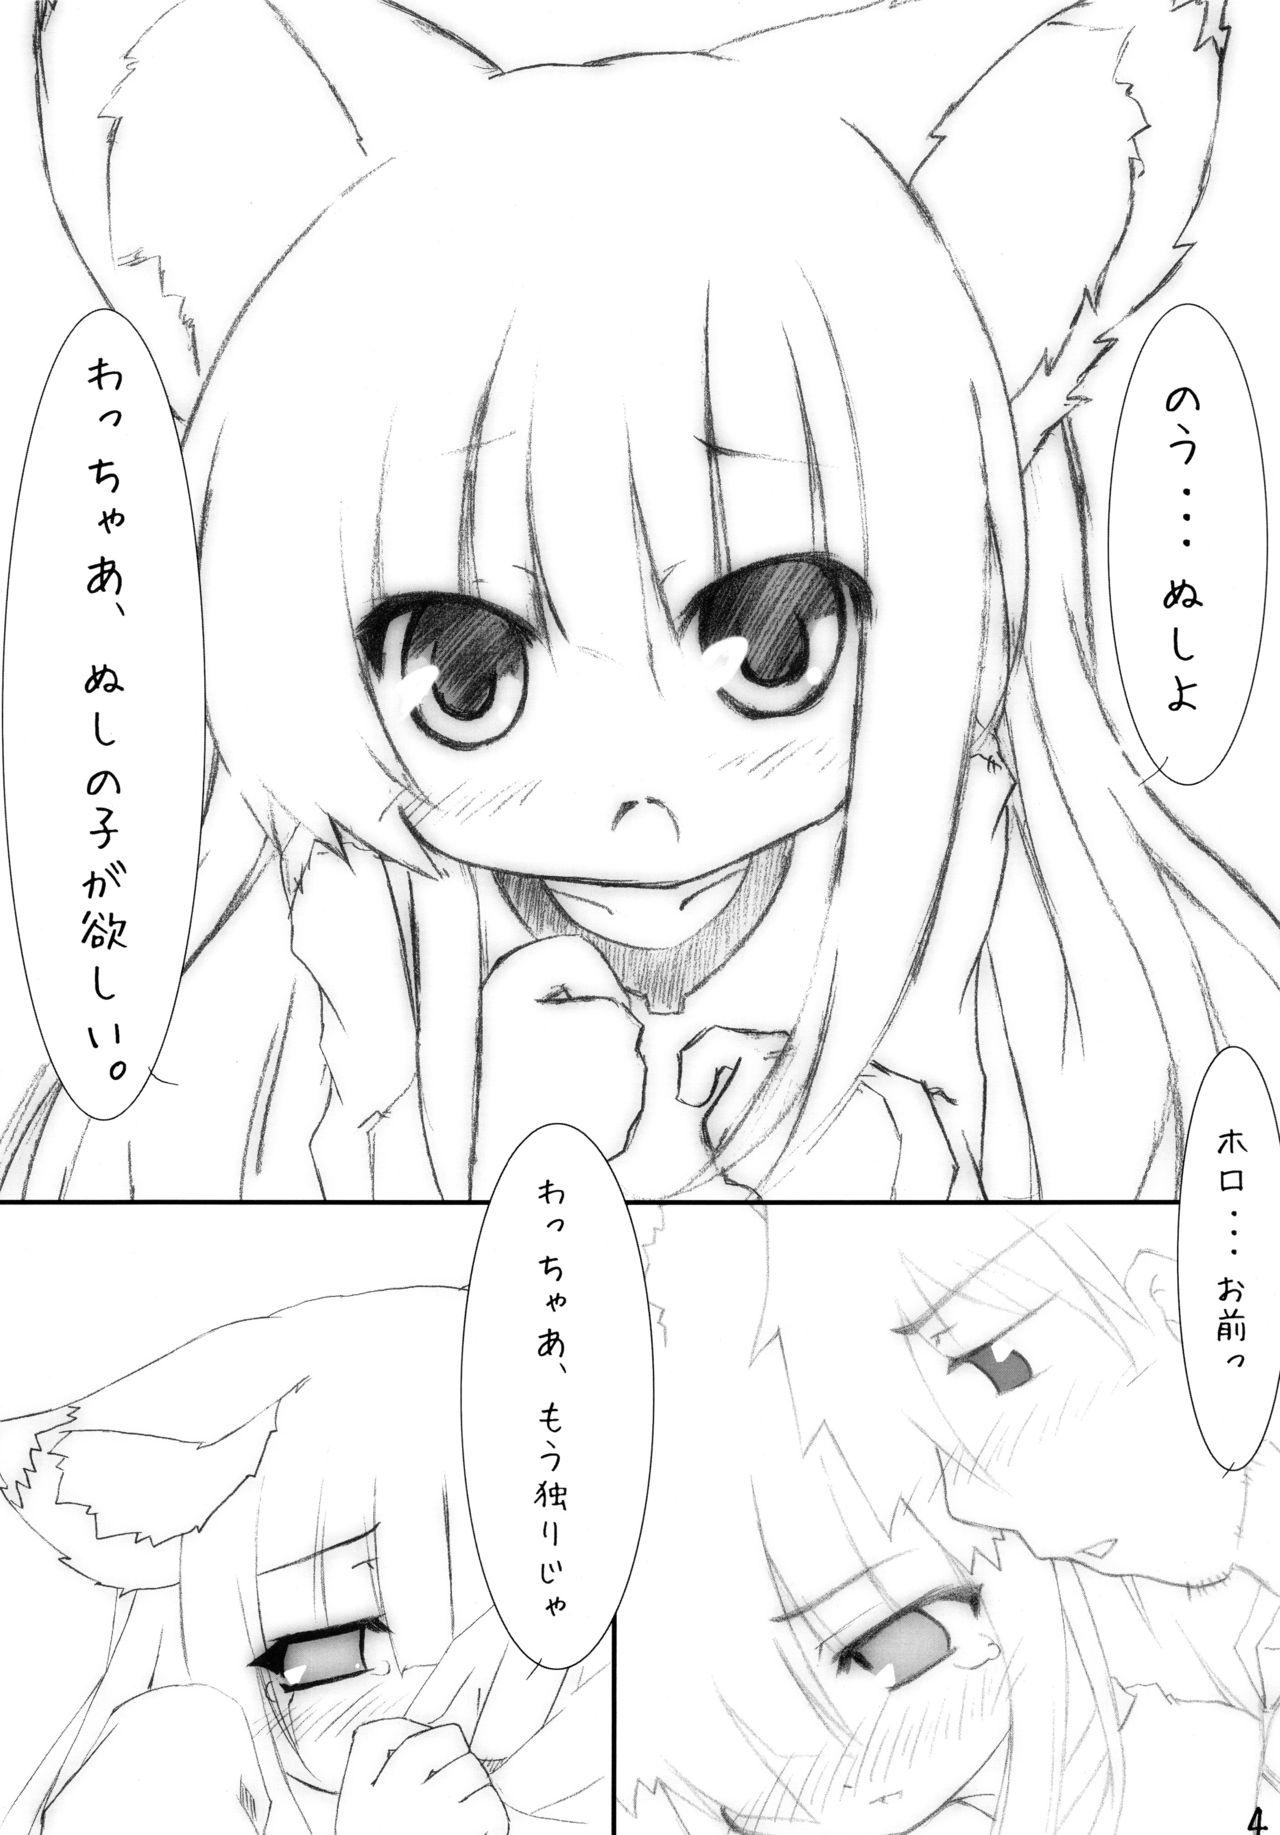 Throat Puni Wacchi - Spice and wolf Anale - Page 4